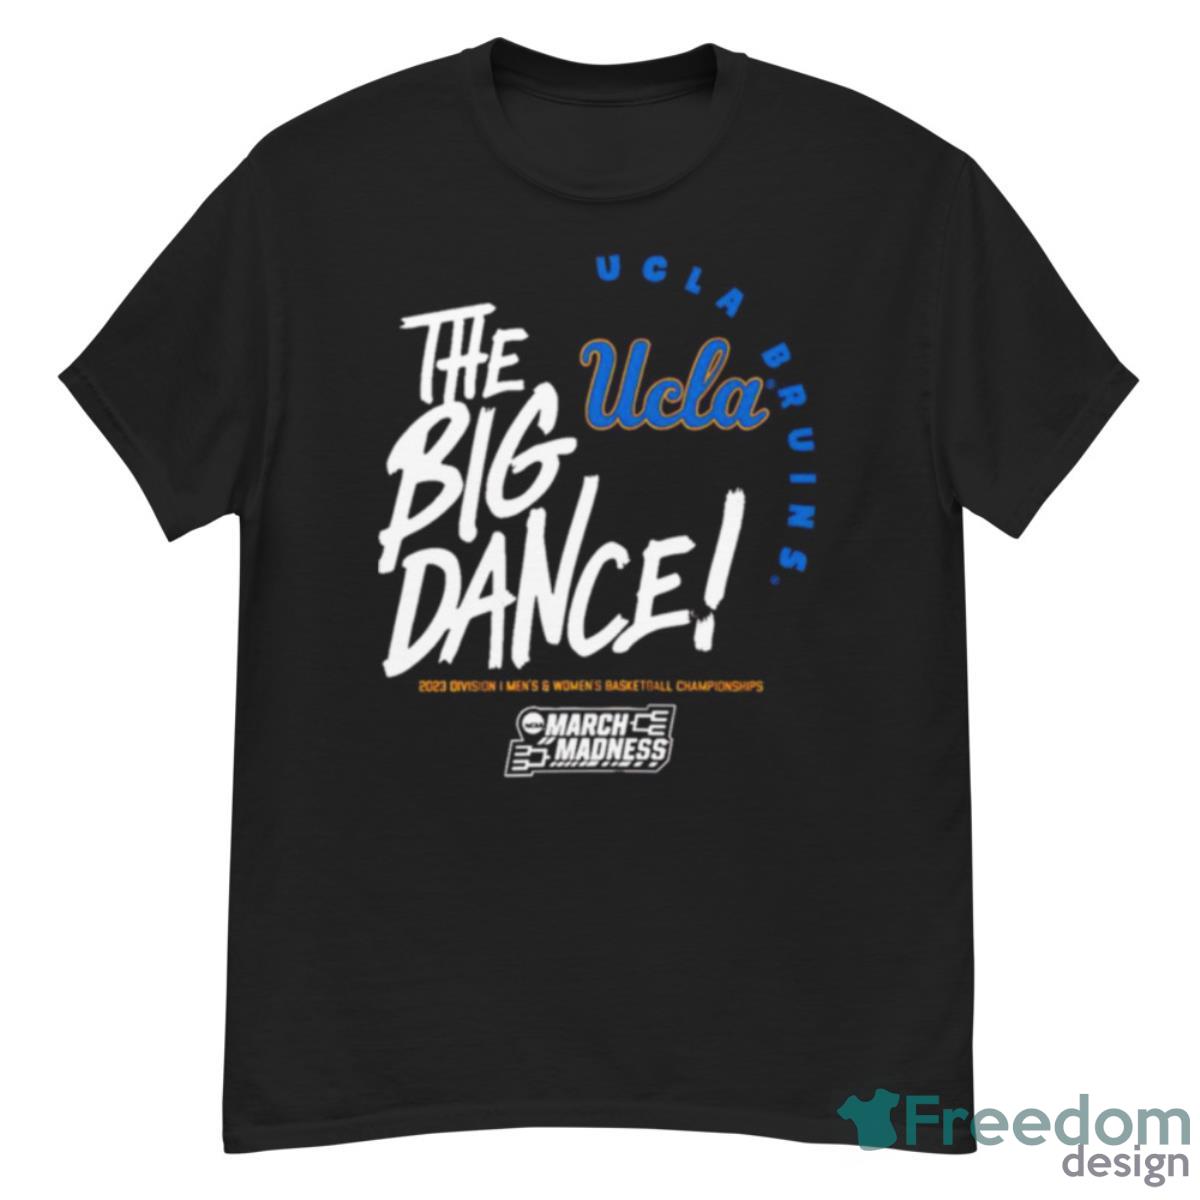 UCLA Bruins the big dance March Madness 2023 Division men’s and women’s basketball championship shirt - G500 Men’s Classic T-Shirt